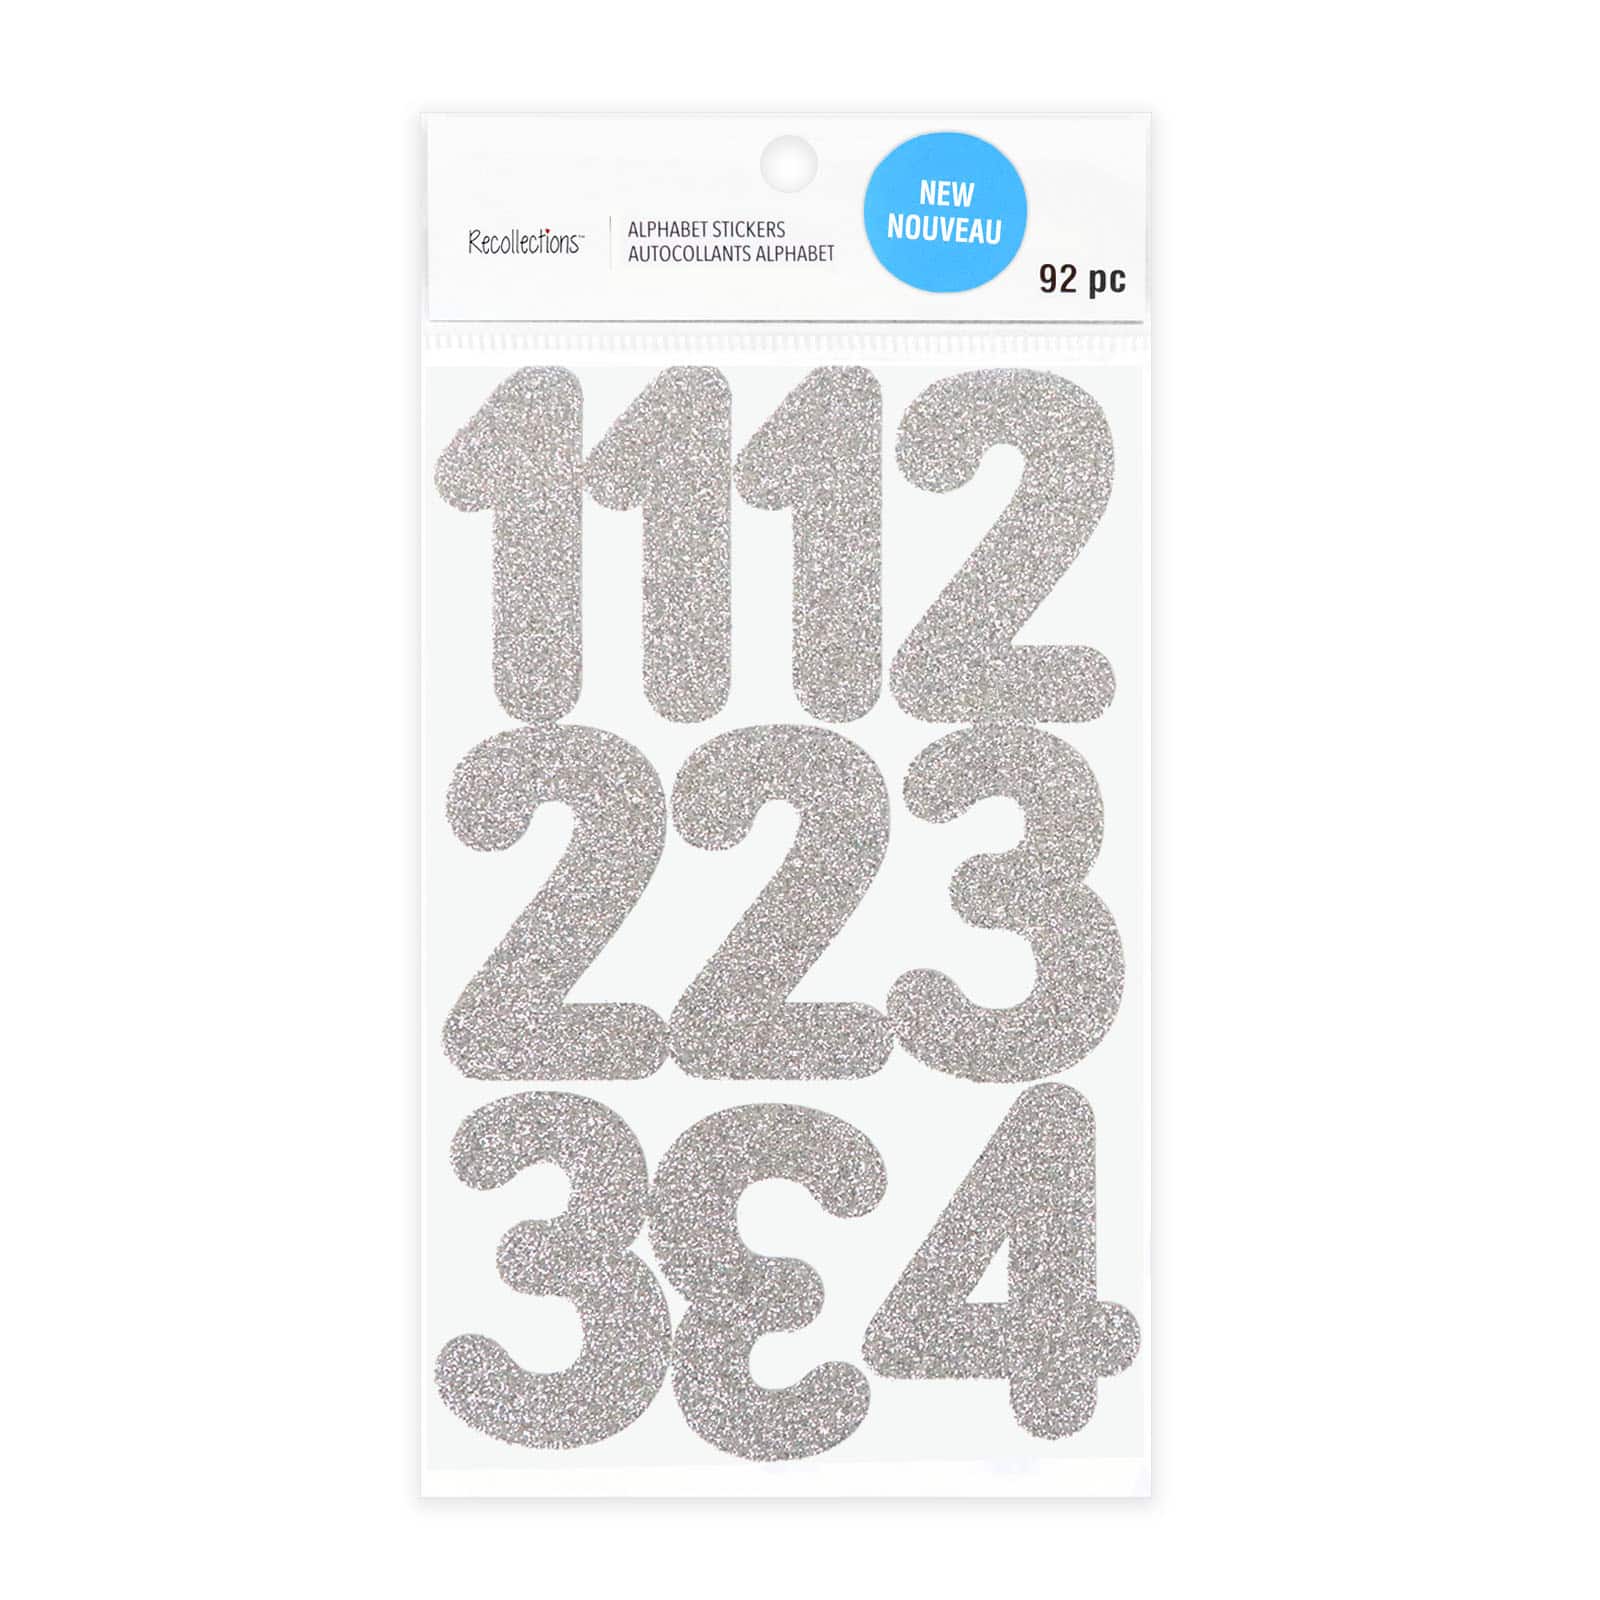 Michaels Bulk 12 Packs: 157 Ct. (1884 Total) Block Alphabet Stickers by Recollections, Size: 5.6 x 10.8, Black